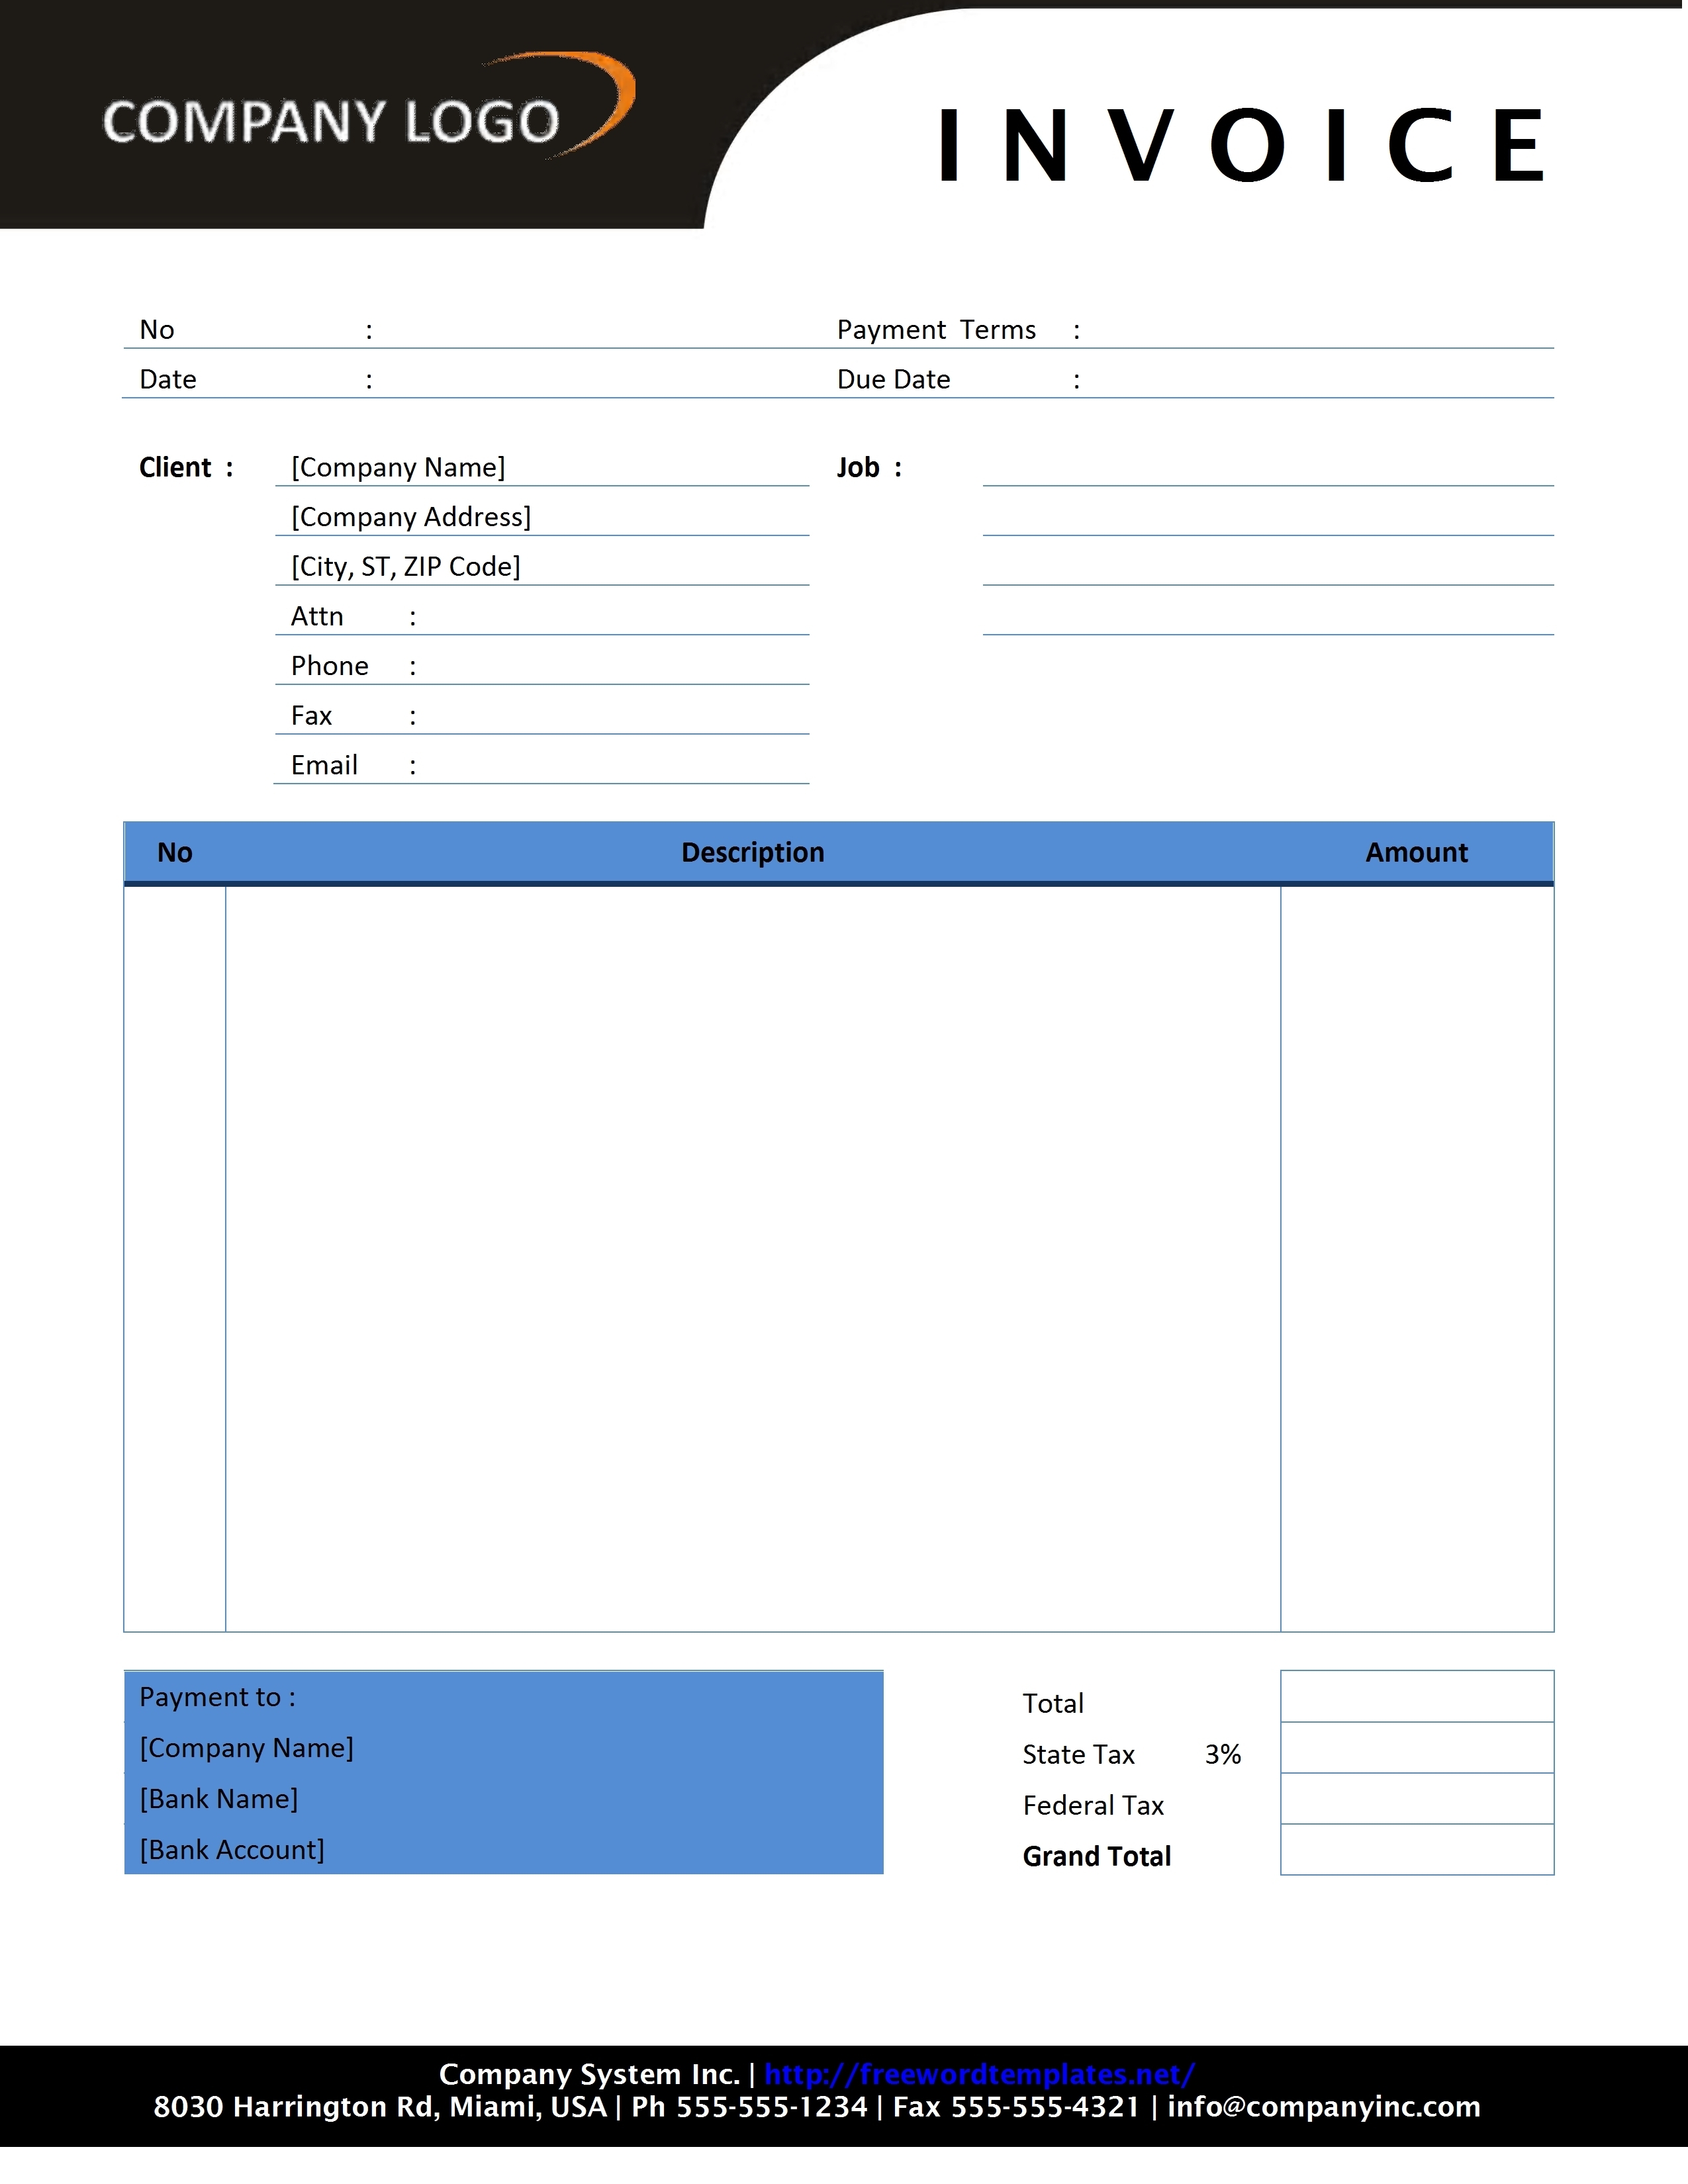 making an invoice in word invoice template free 2016 create an invoice in microsoft word